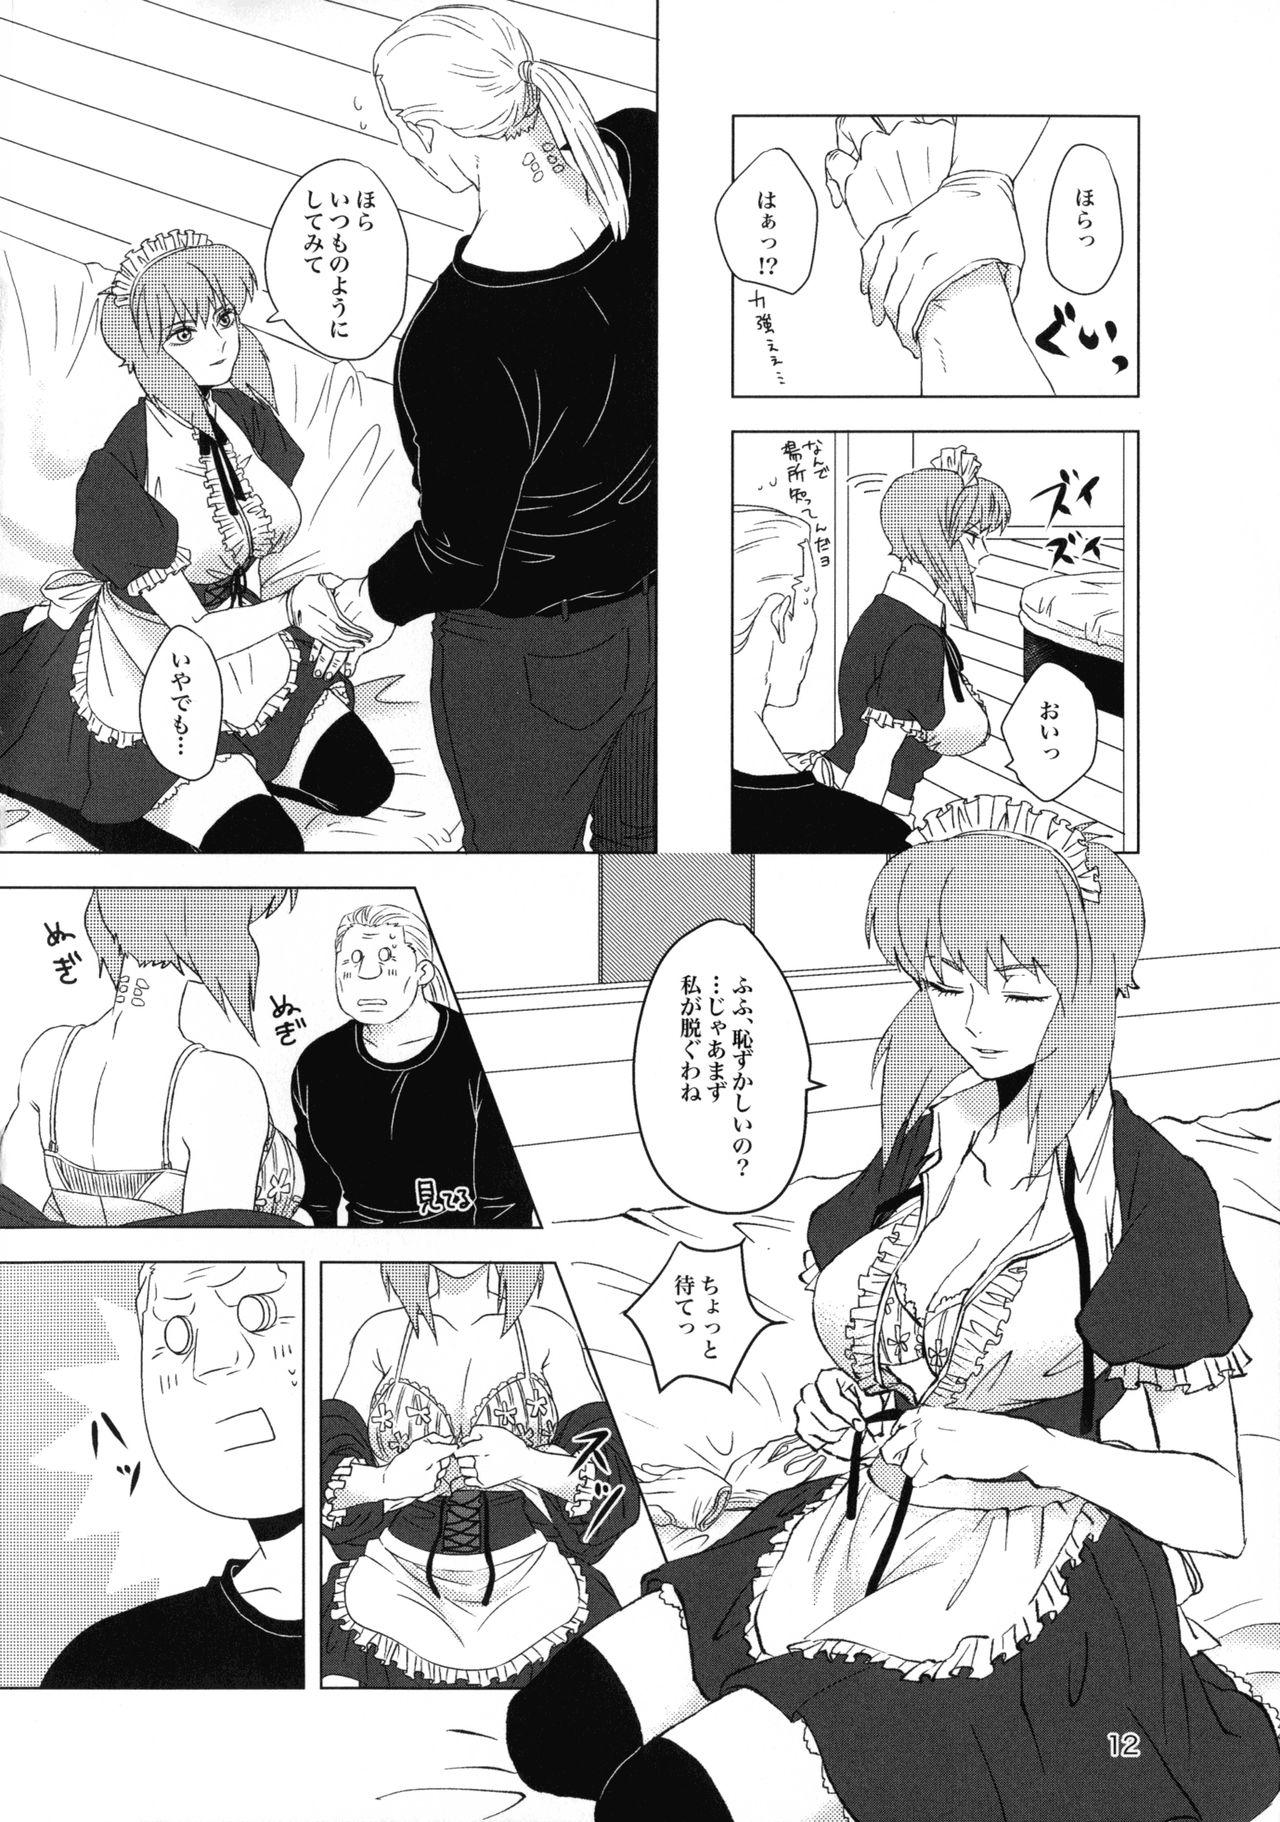 Best Blowjob FRENCHMAIDCOSTUME BTMT - Ghost in the shell Softcore - Page 12